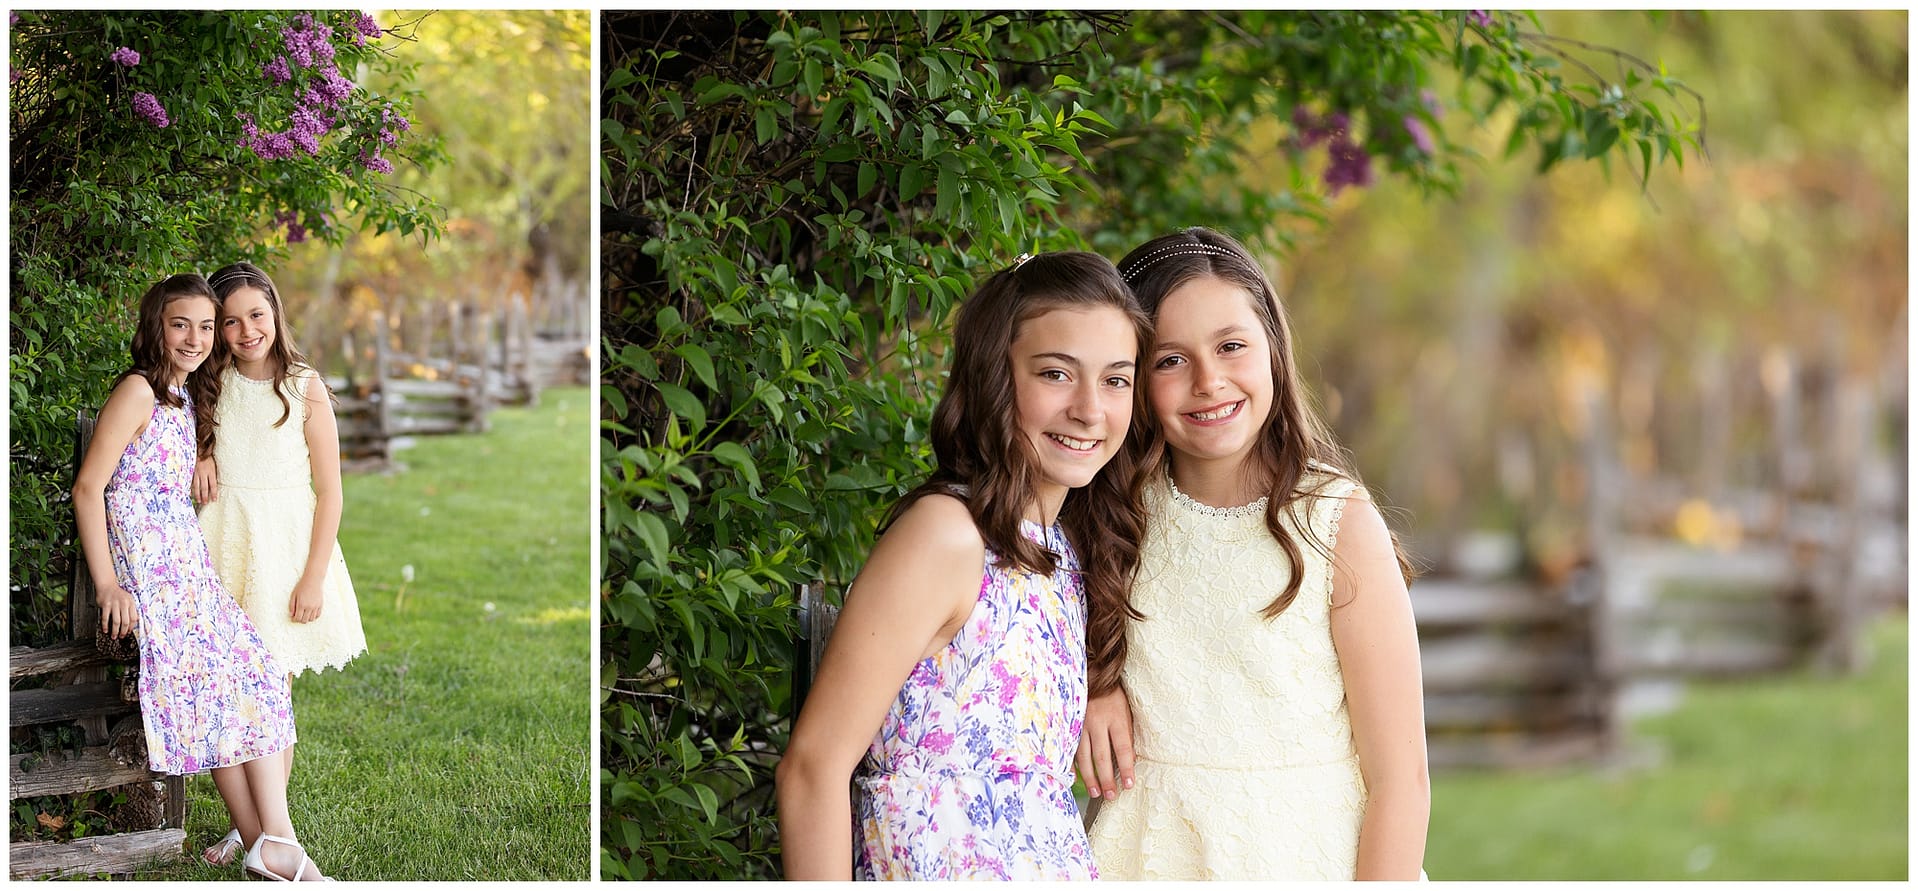 Sisters pose during Boise family photo. Photos by Tiffany Hix Photography.